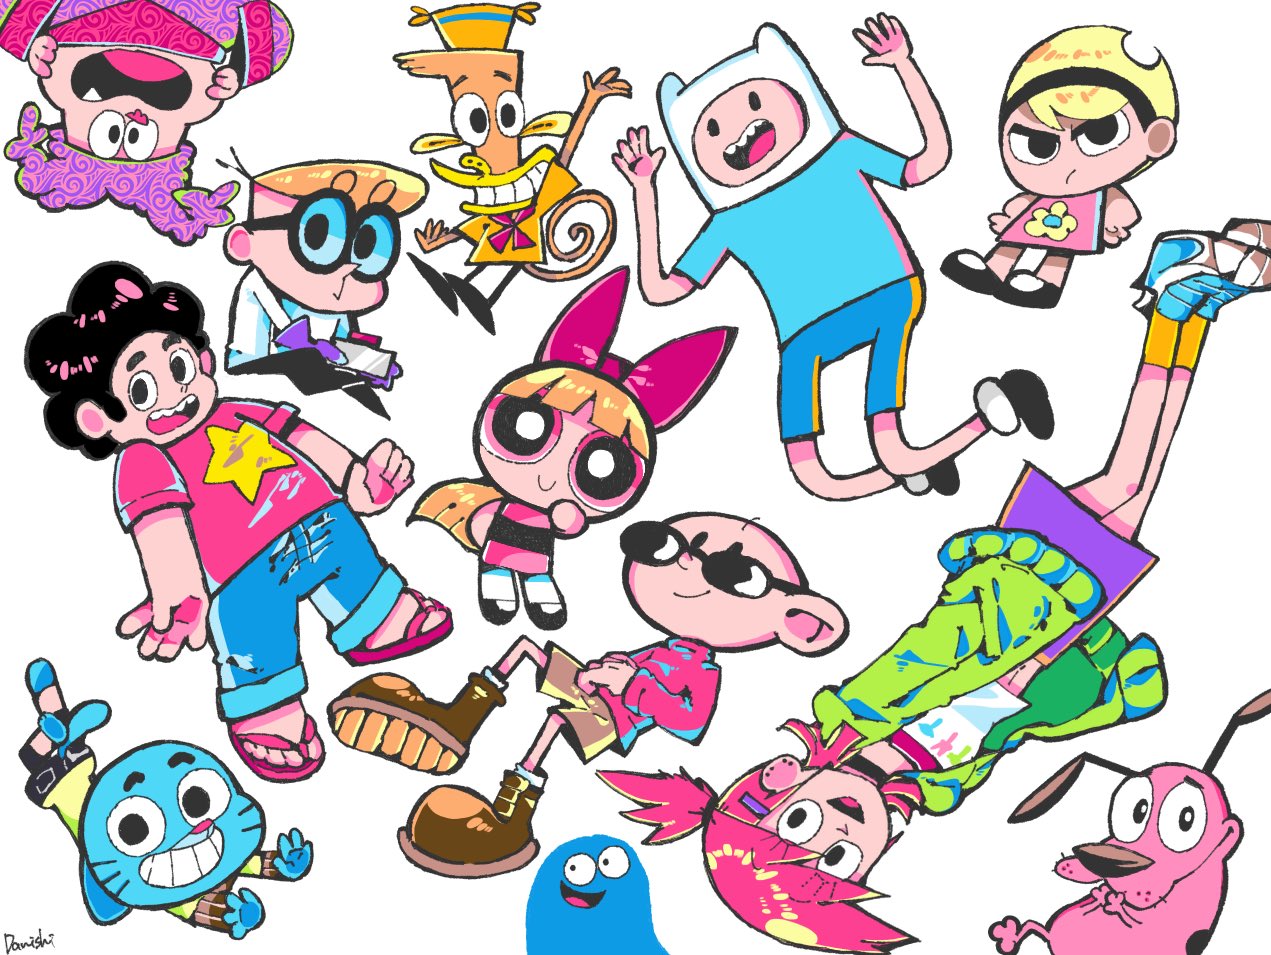 blonde_hair blooregard_q_kazoo blossom_(ppg) brown_footwear cartoon_network cat character_request chowder chowder_(series) codename:_kids_next_door courage_(character) courage_the_cowardly_dog danishi dexter dog finn_the_human foster's_home_for_imaginary_friends frankie_foster glasses gumball_watterson lazlo_(camp_lazlo) mandy_(grim_adventures) monkey nigel_uno powerpuff_girls red_hair smile steven_quartz_universe steven_universe sunglasses the_grim_adventures_of_billy_&amp;_mandy